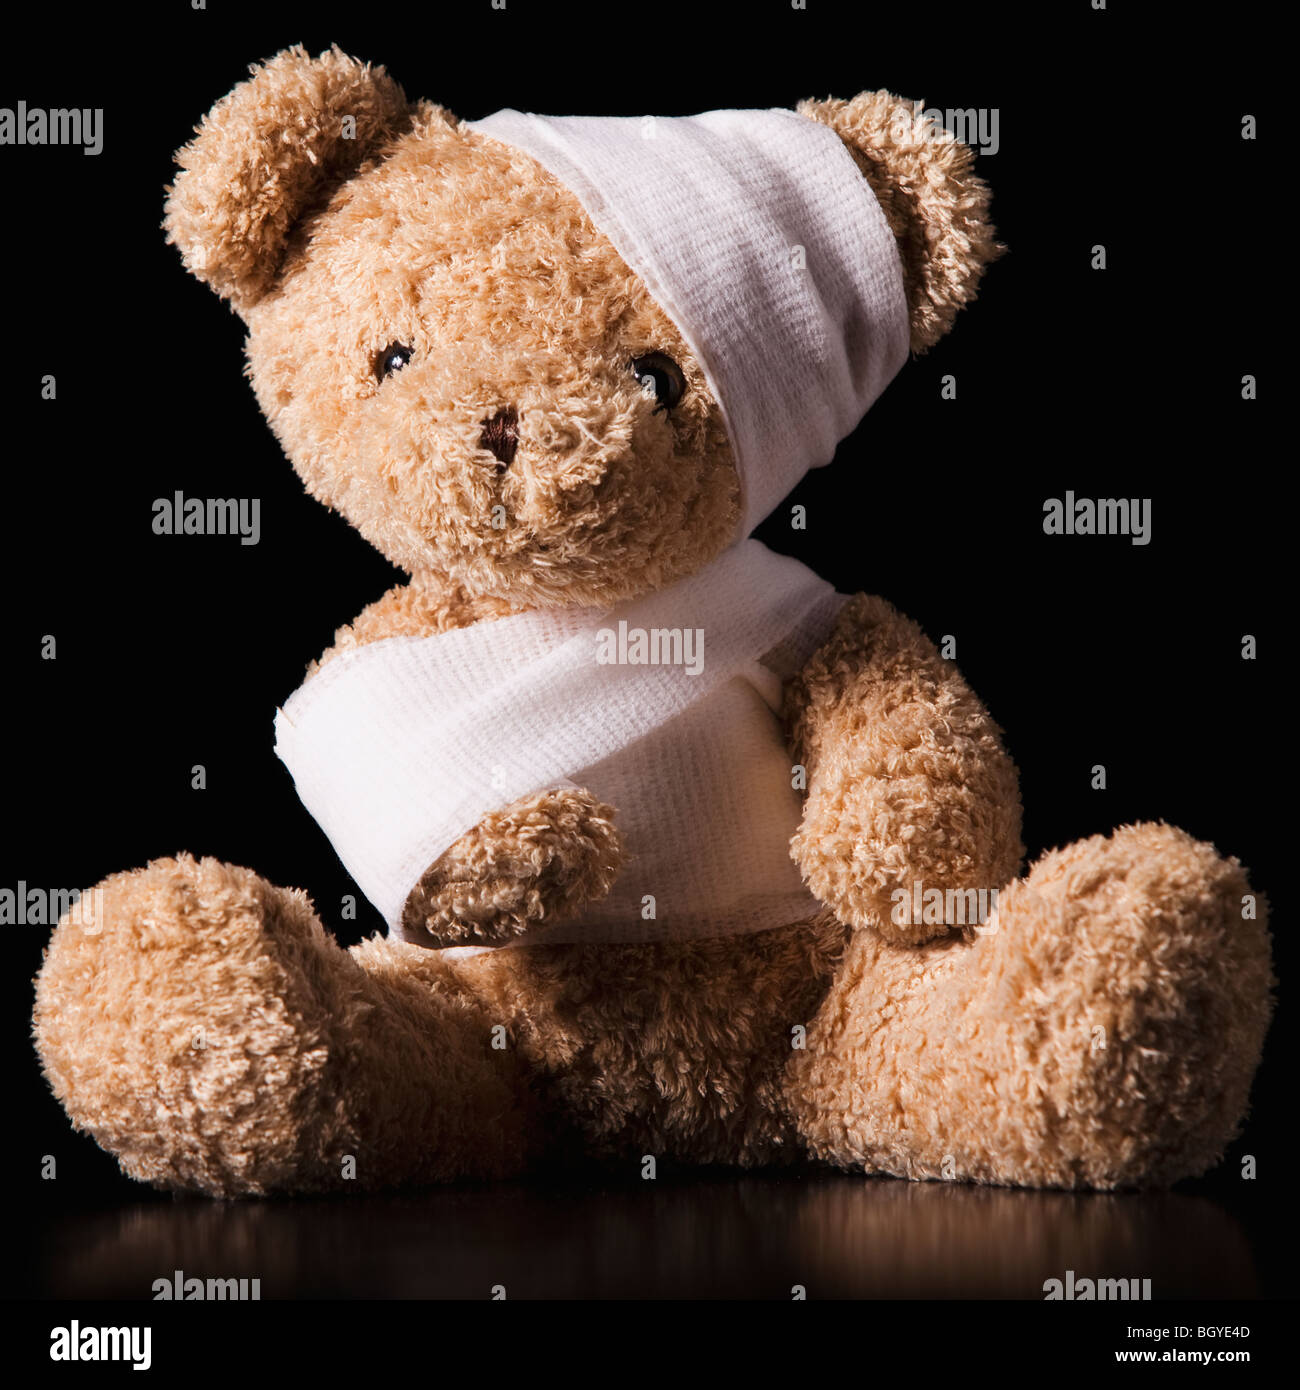 Injured Teddy Bear wrapped in bandage Stock Photo